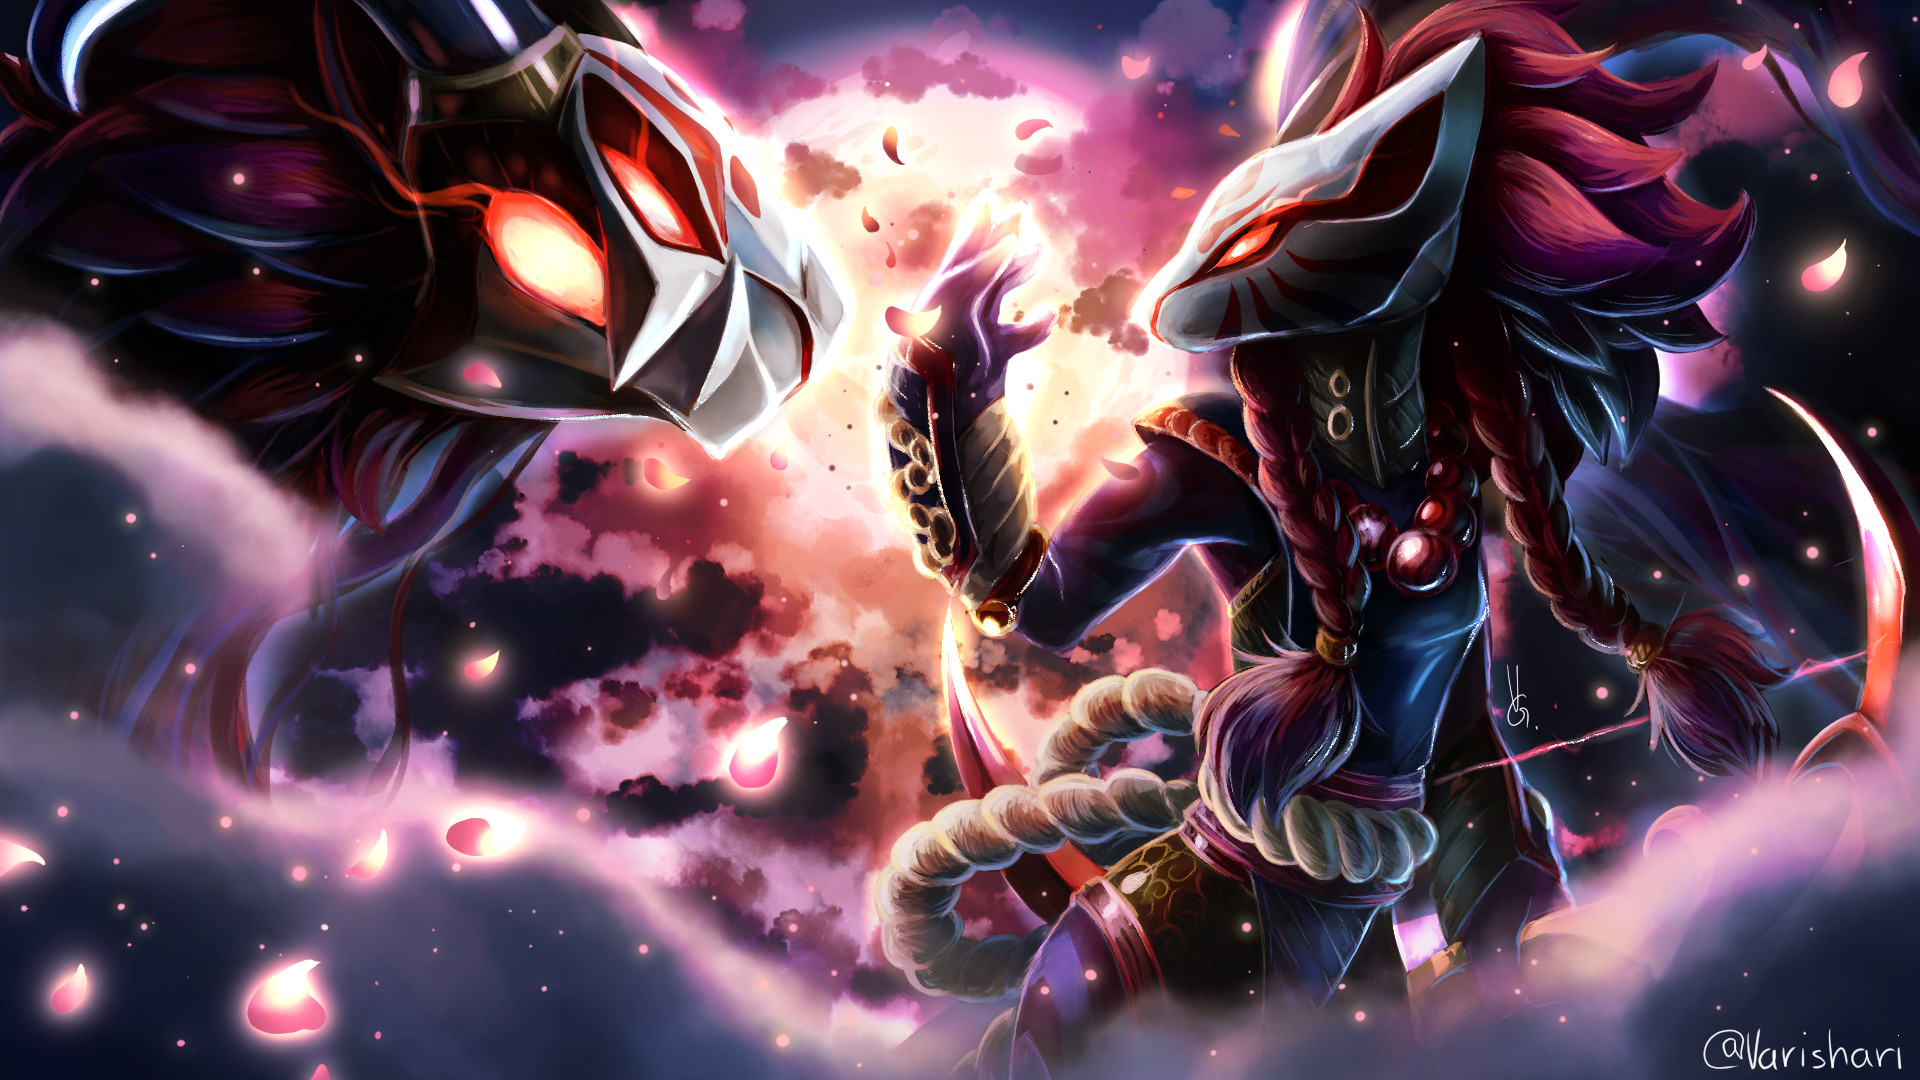 Blood Moon Kindred